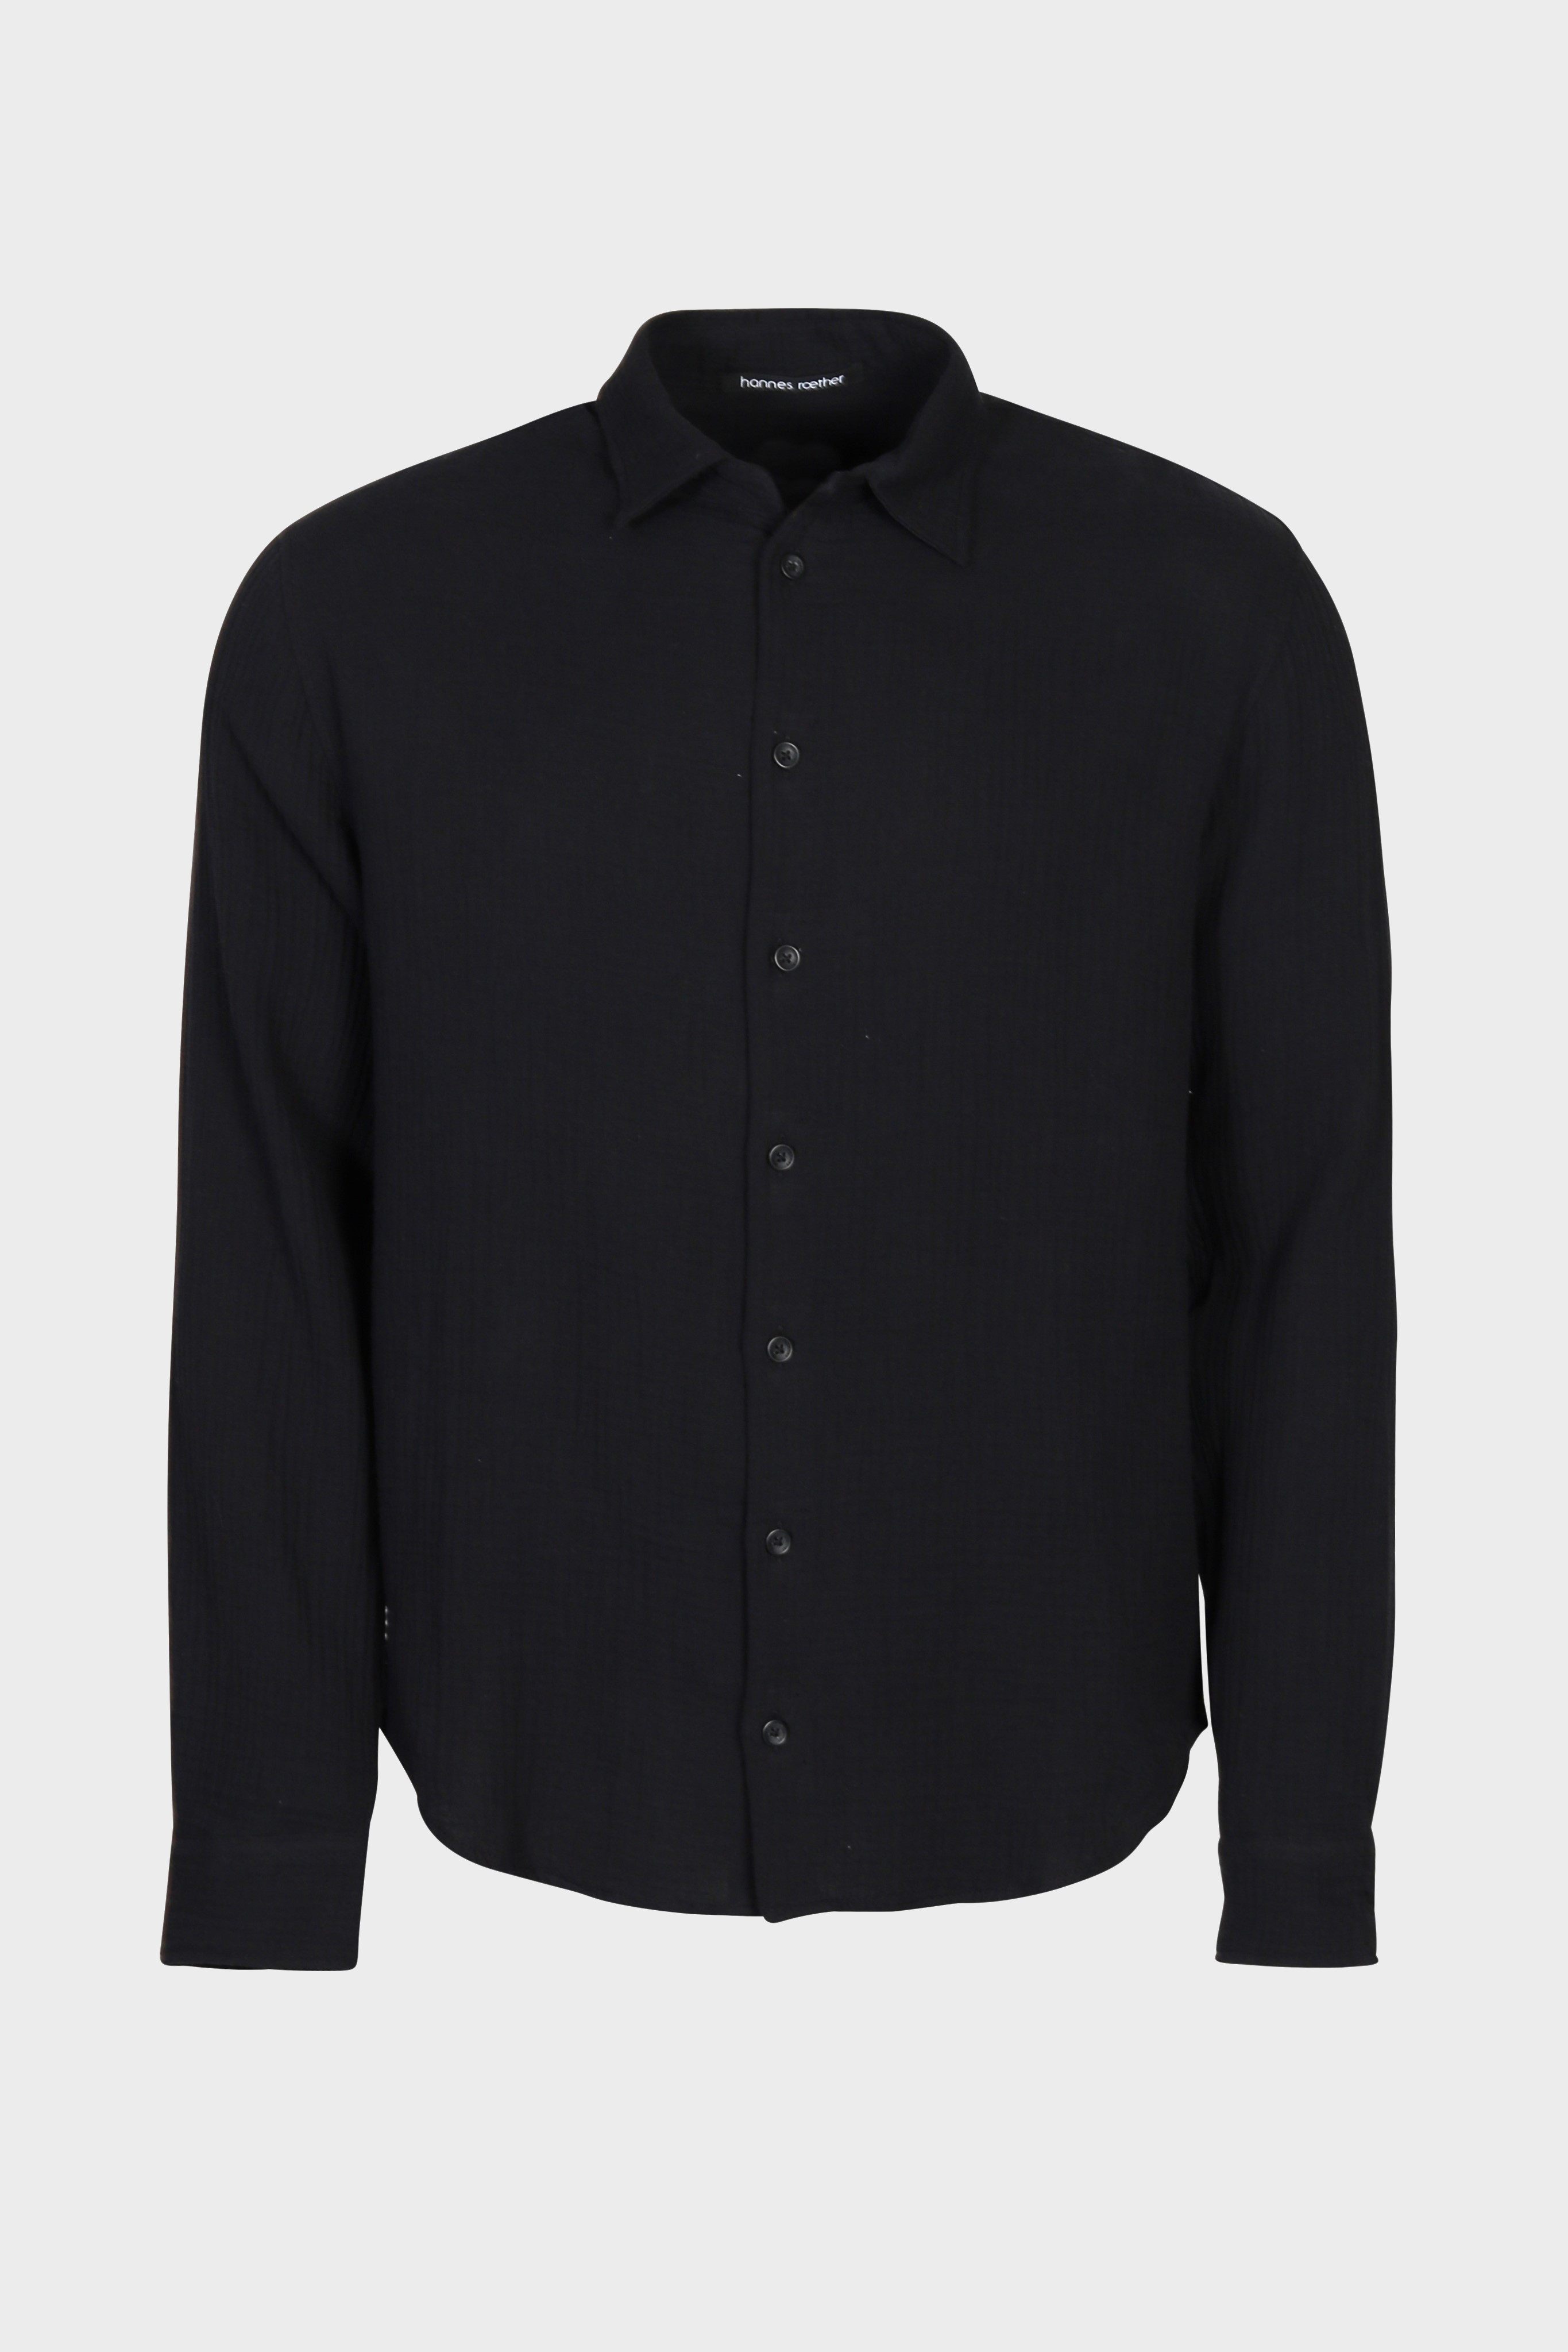 HANNES ROETHER Mousseline Shirt in Black M